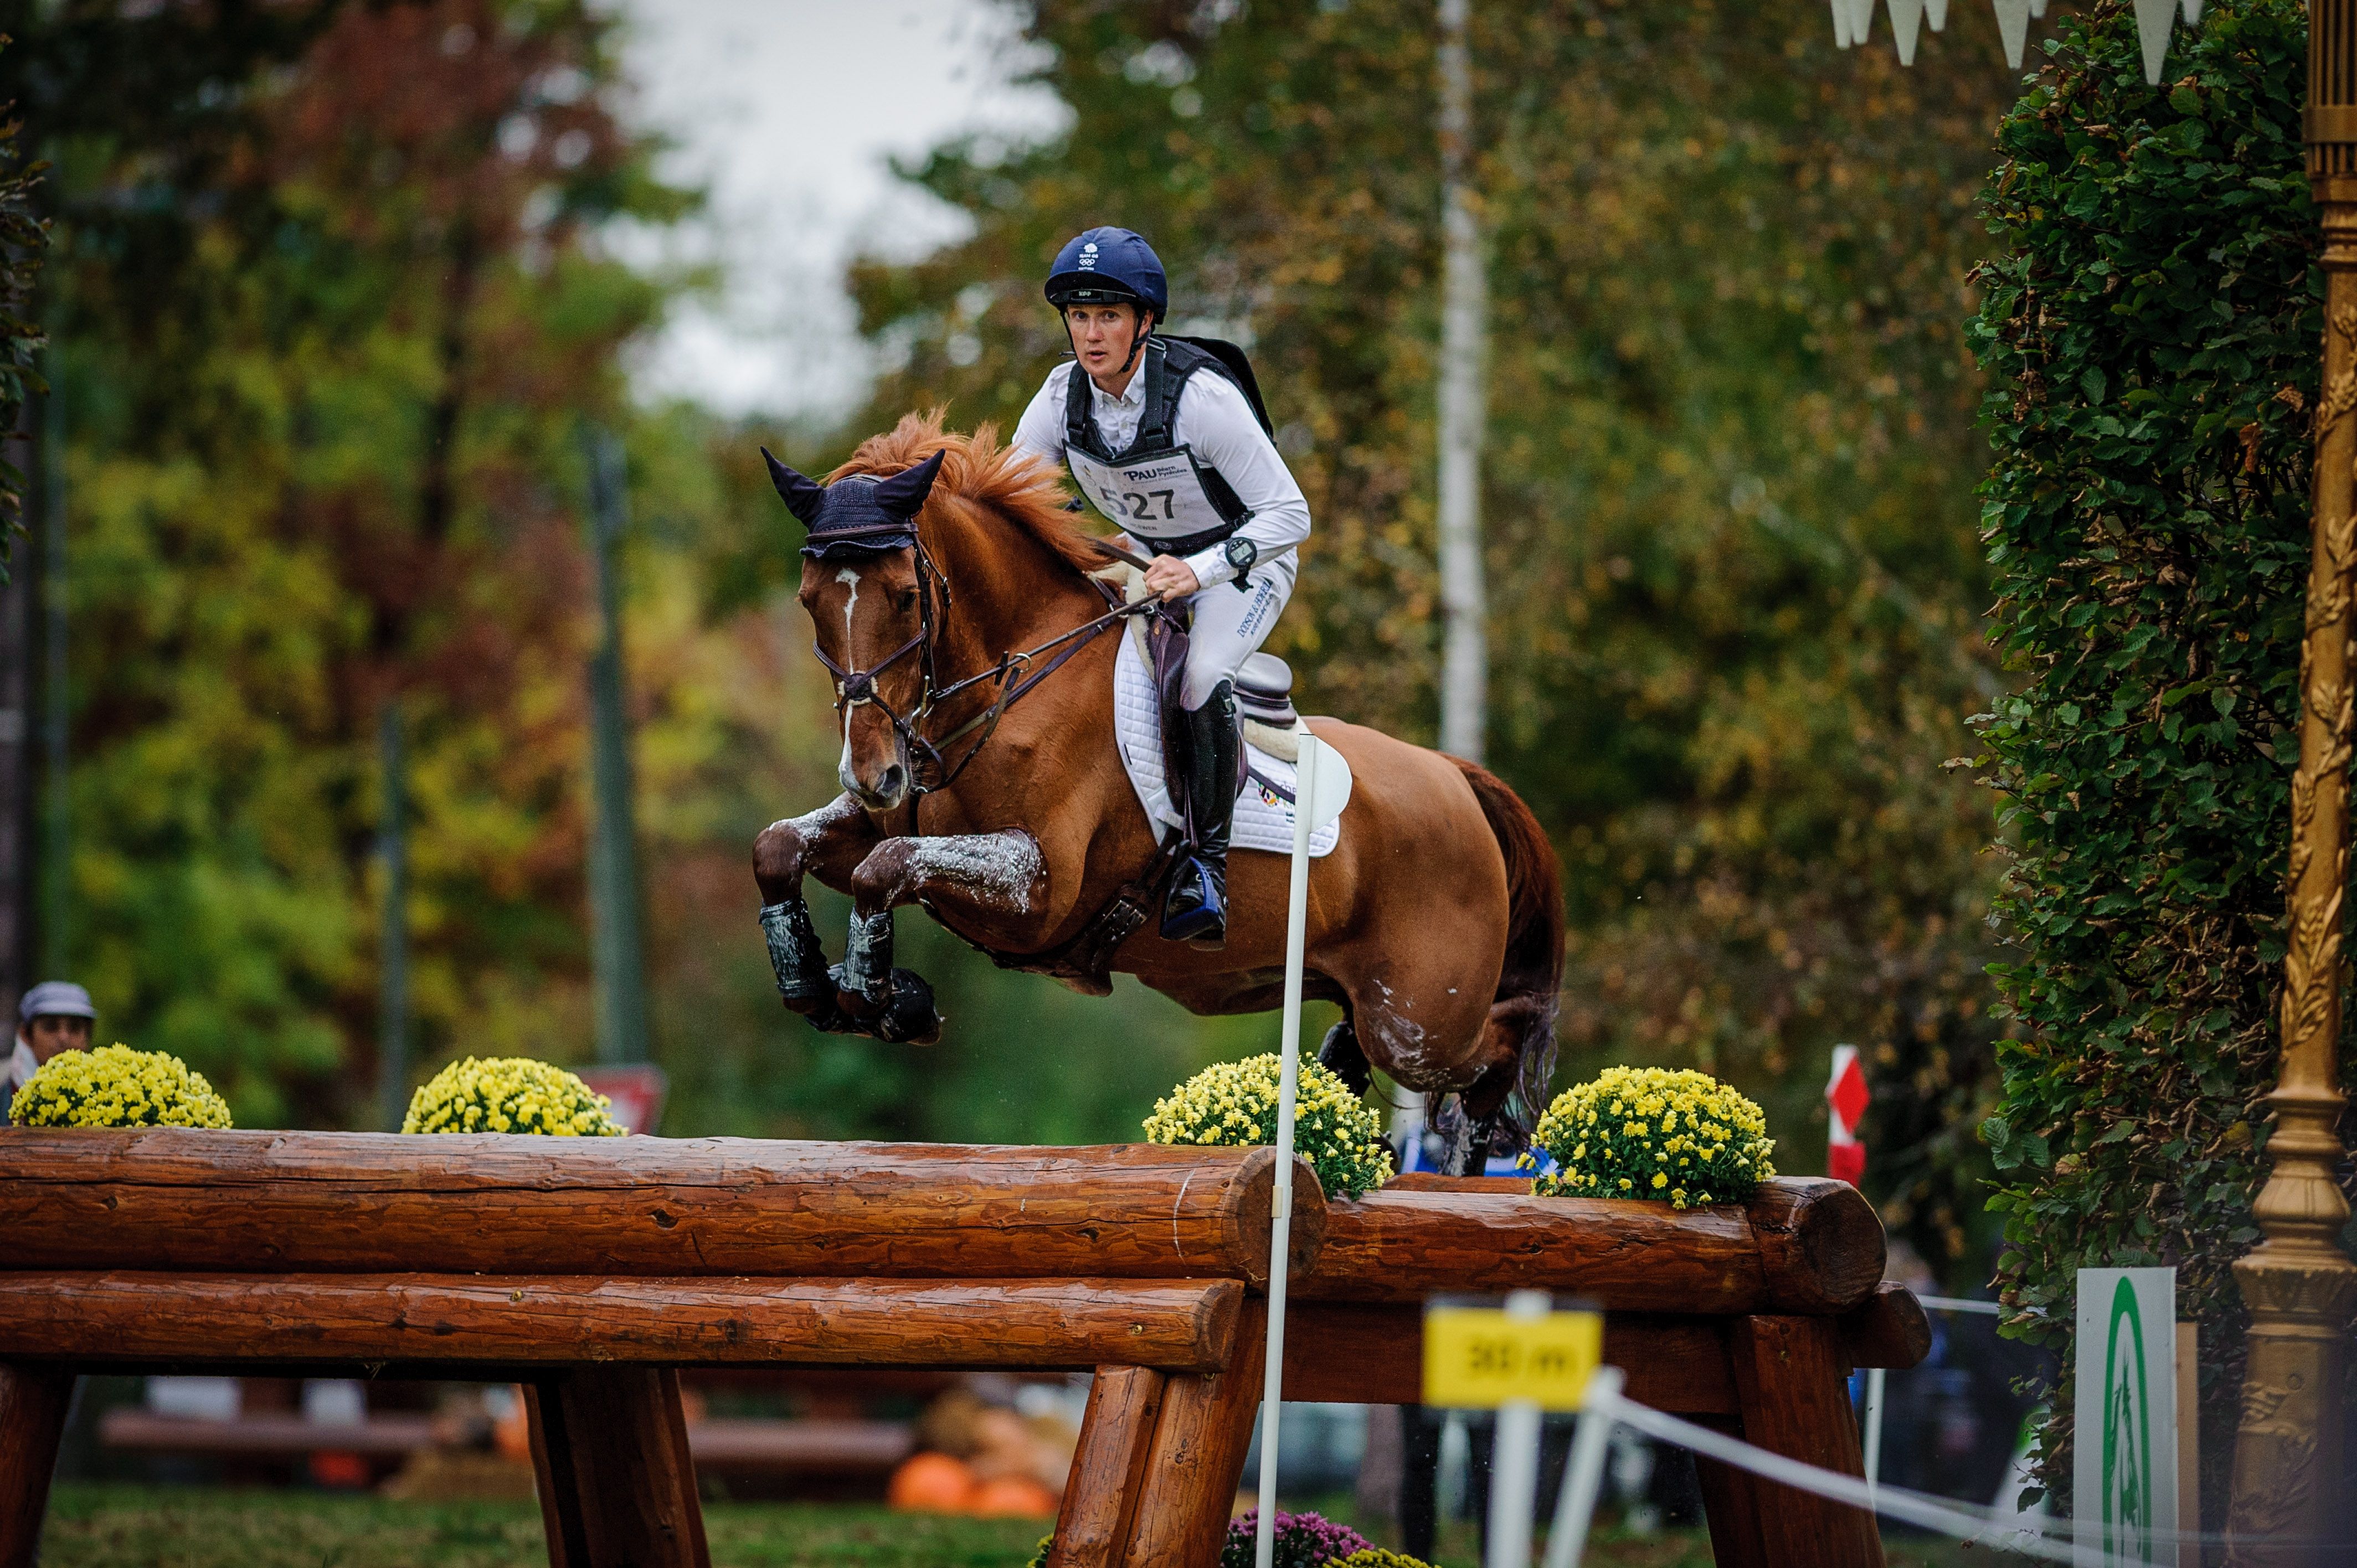 Horse and Country Announces Biggest-Ever Live Eventing Lineup for 2022 Season